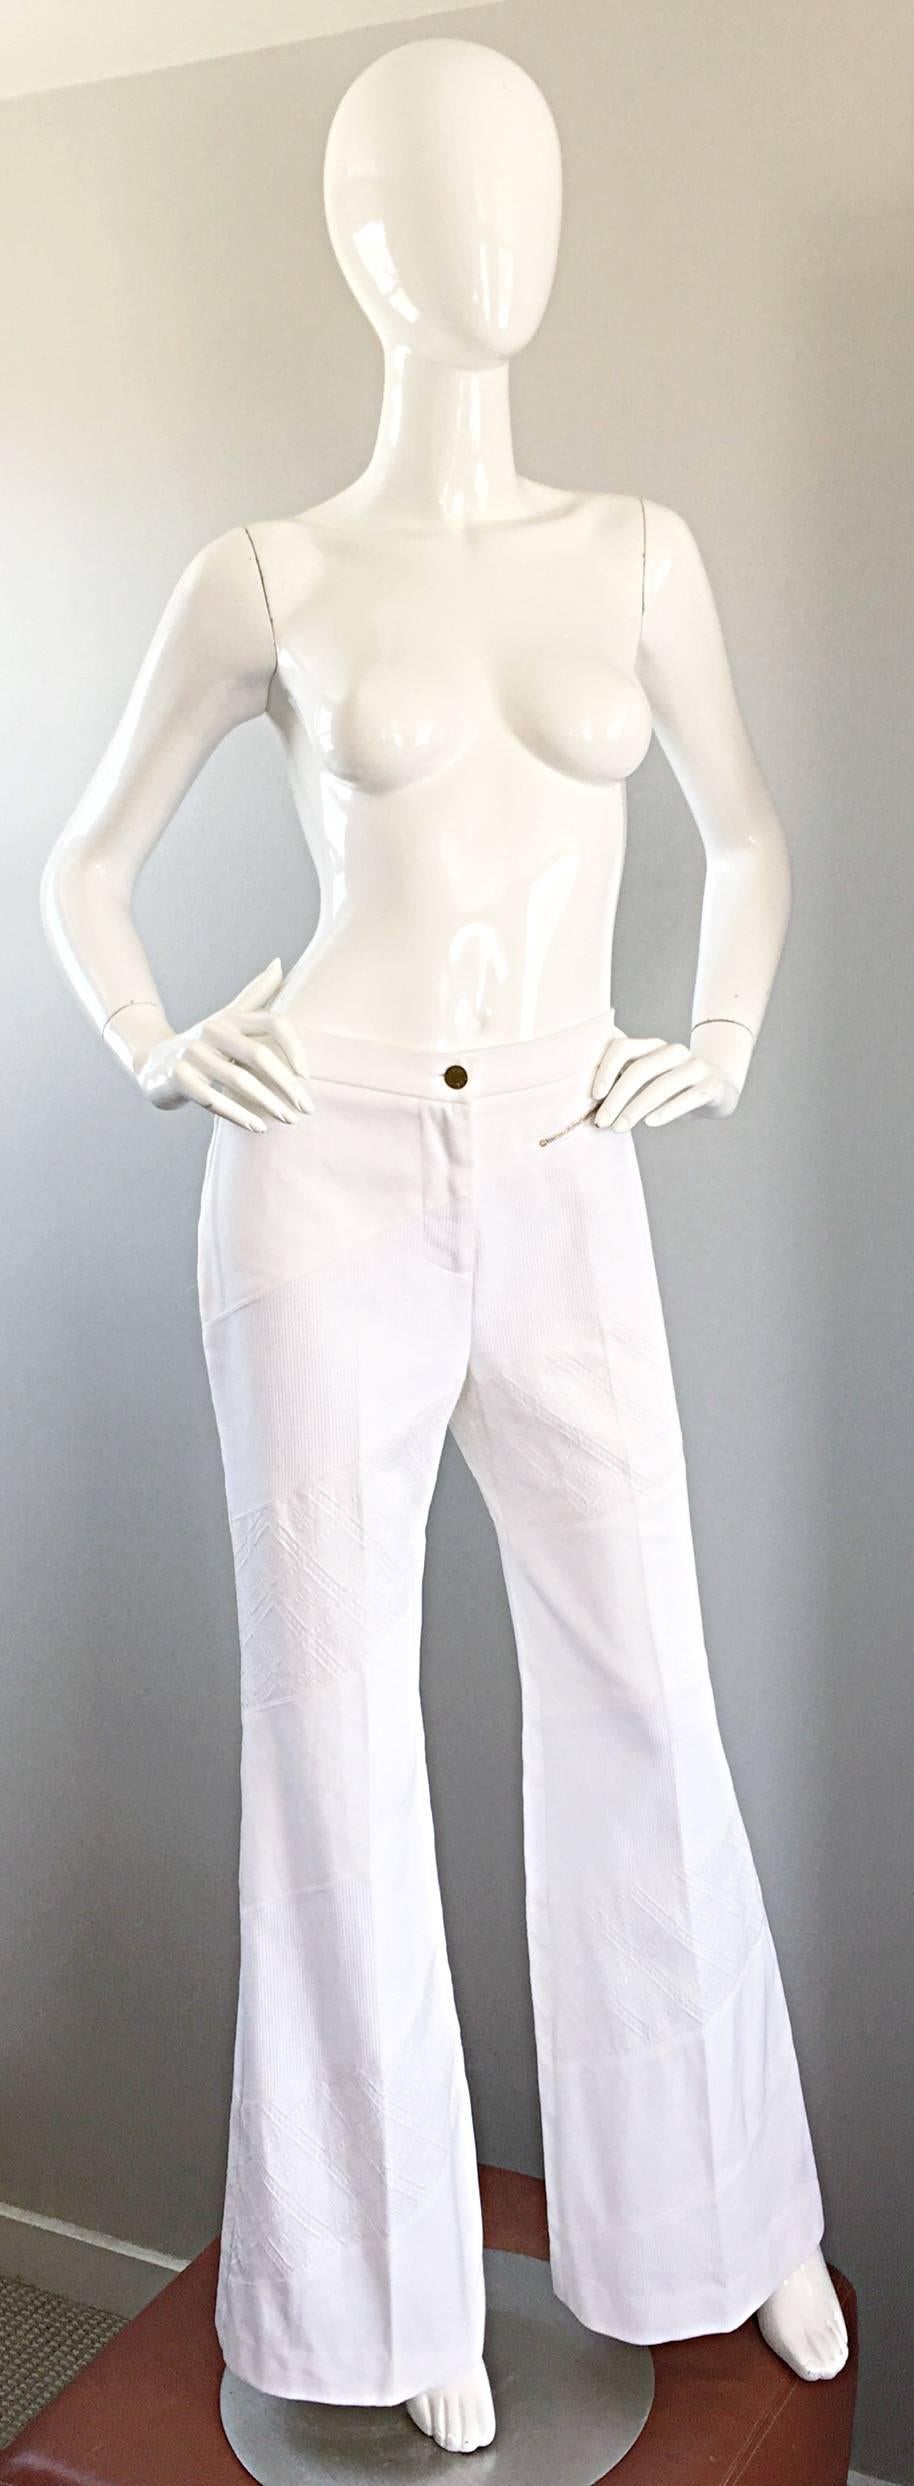 Stunning (never worn) CHLOE, by PHOEBE PHILO white embroidered cotton flat front high waisted wide leg trousers! Features gold zipper on the front left leg and right back buttocks. Diagonal embroidered patches throughout. Fully lined (lining is